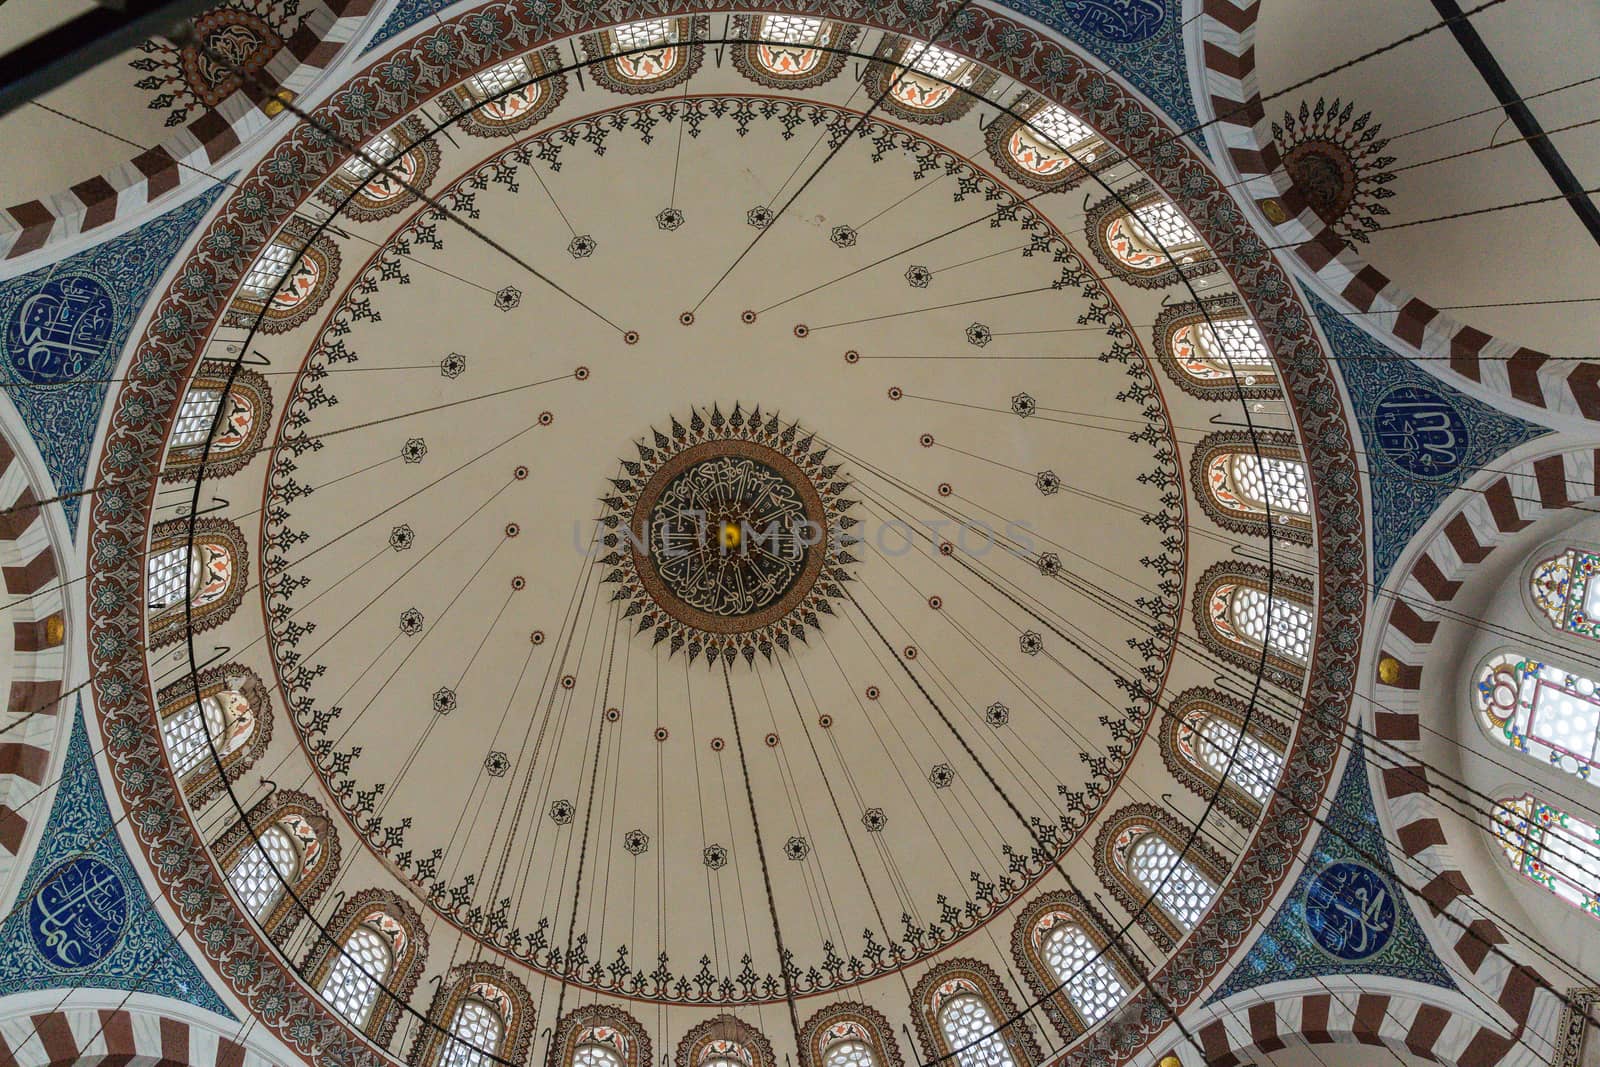 Spectacular ceiling of a mosque in Istanbul